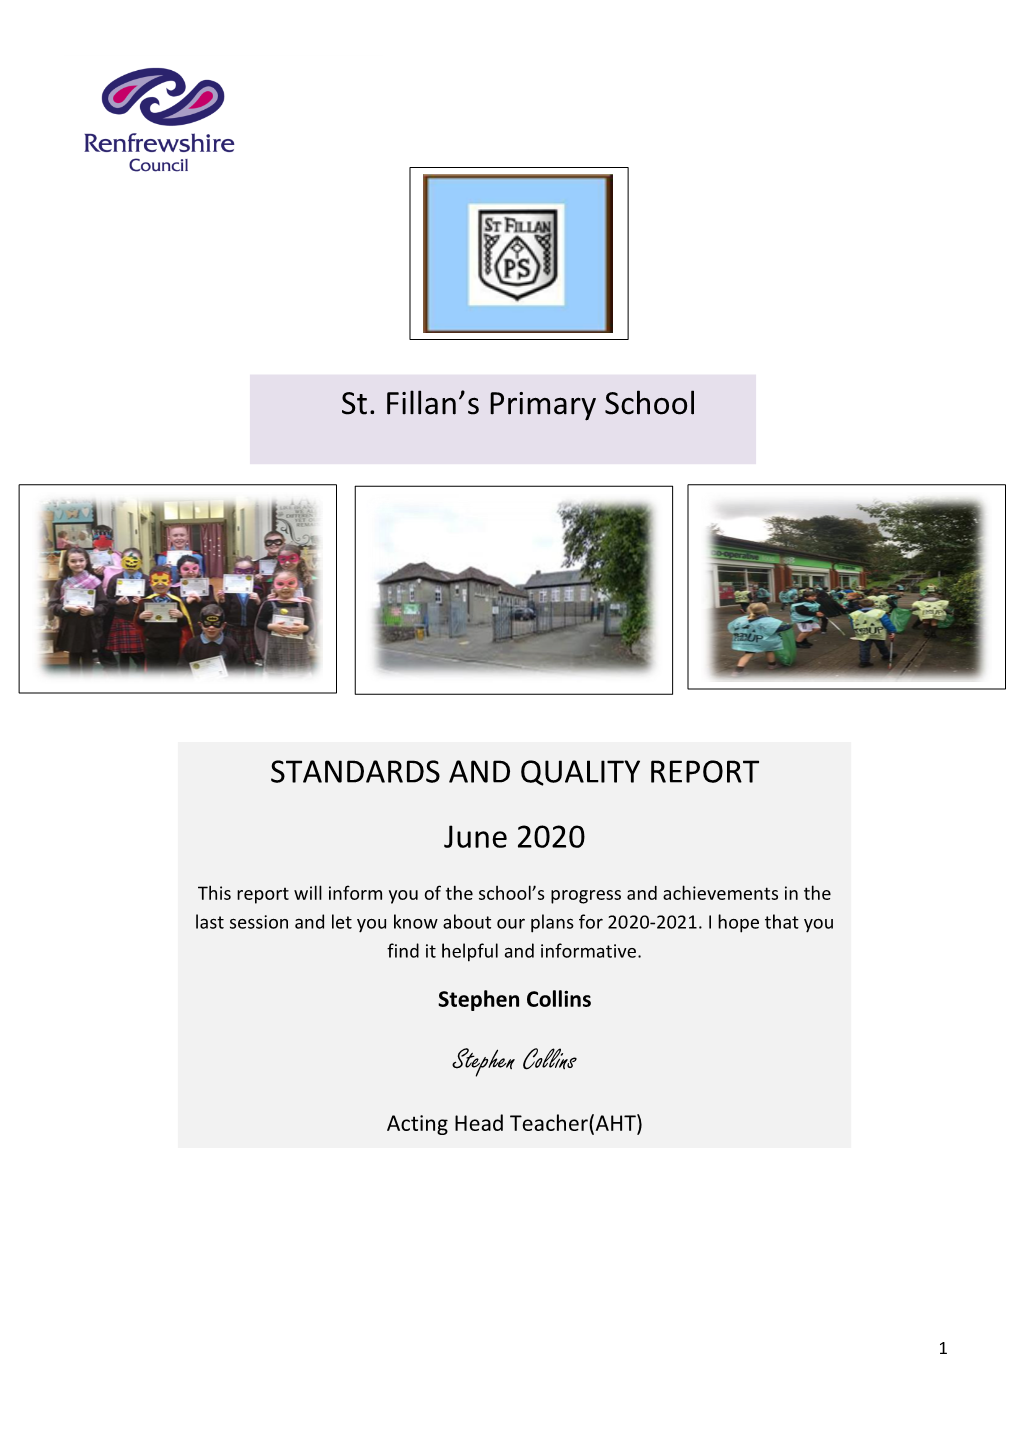 St. Fillan's Primary School STANDARDS and QUALITY